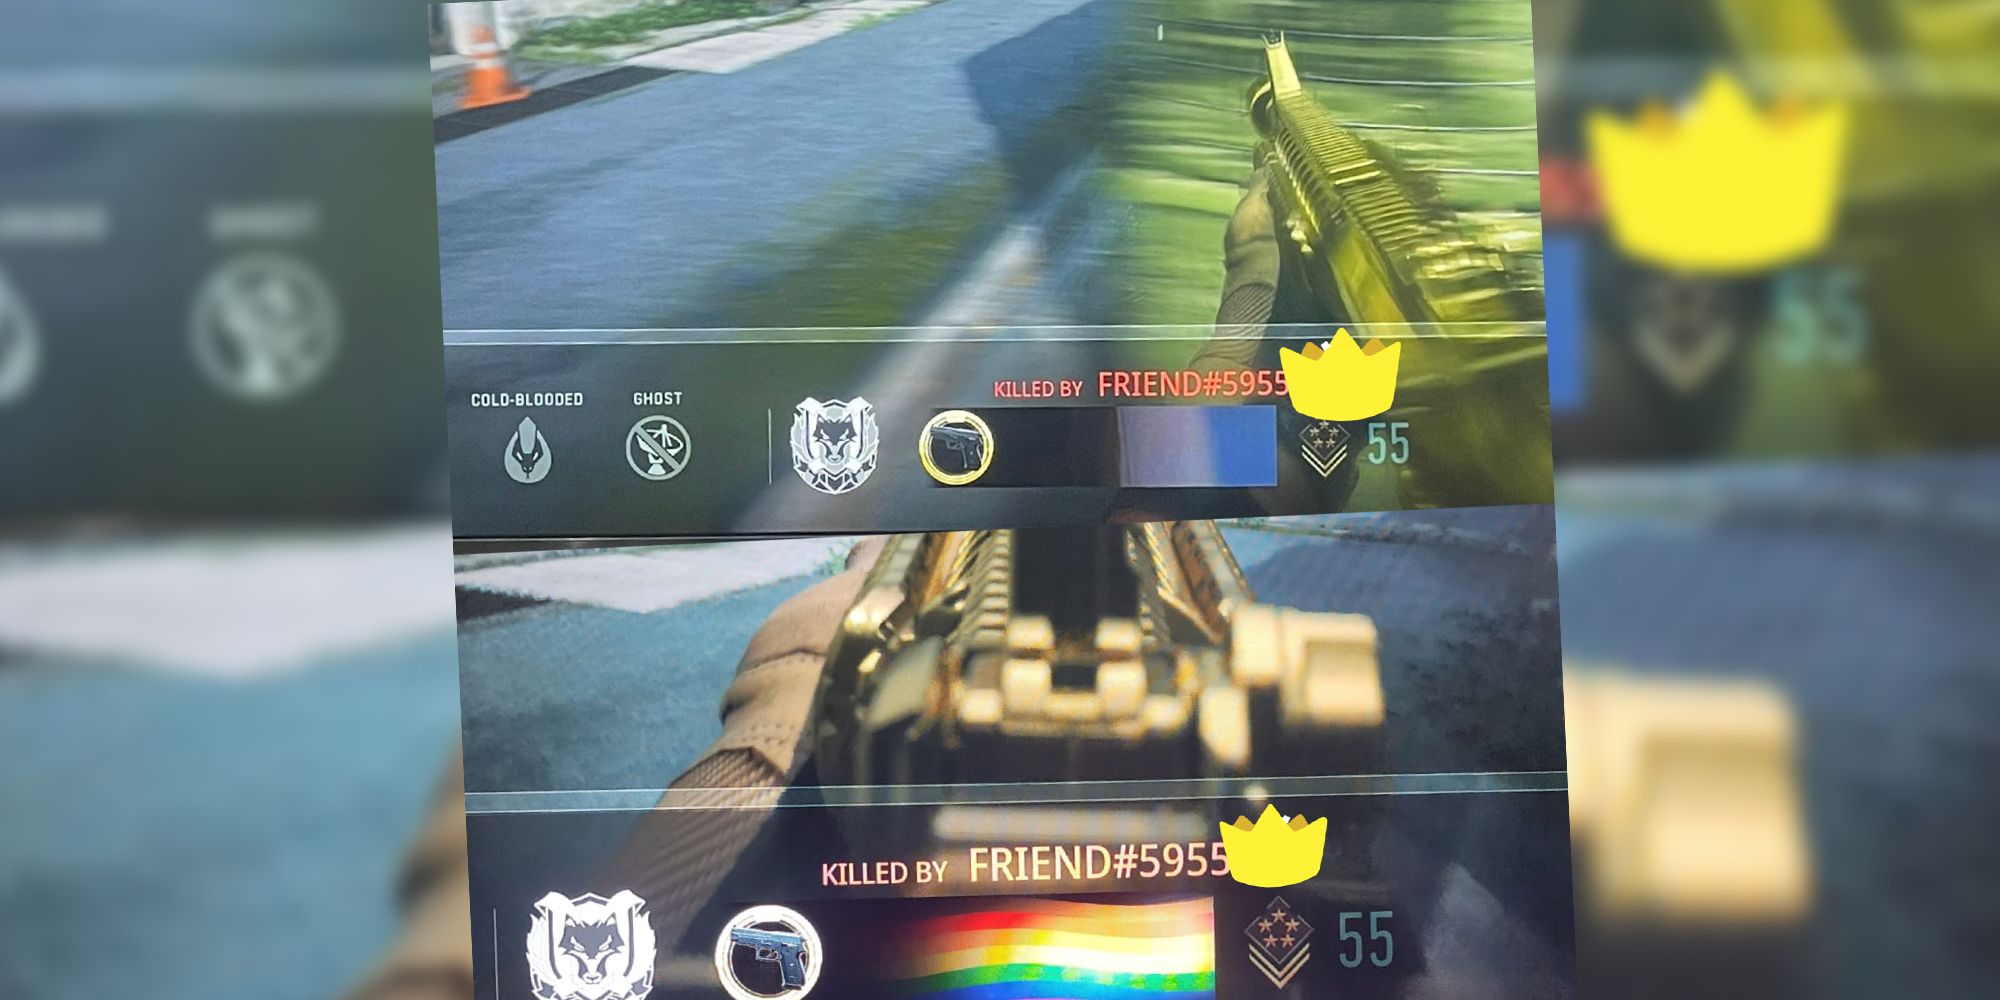 Modern Warfare 2 Pride Flag censored on the top image, but showing on the bottom, with an enlarged version of the image blurred behind